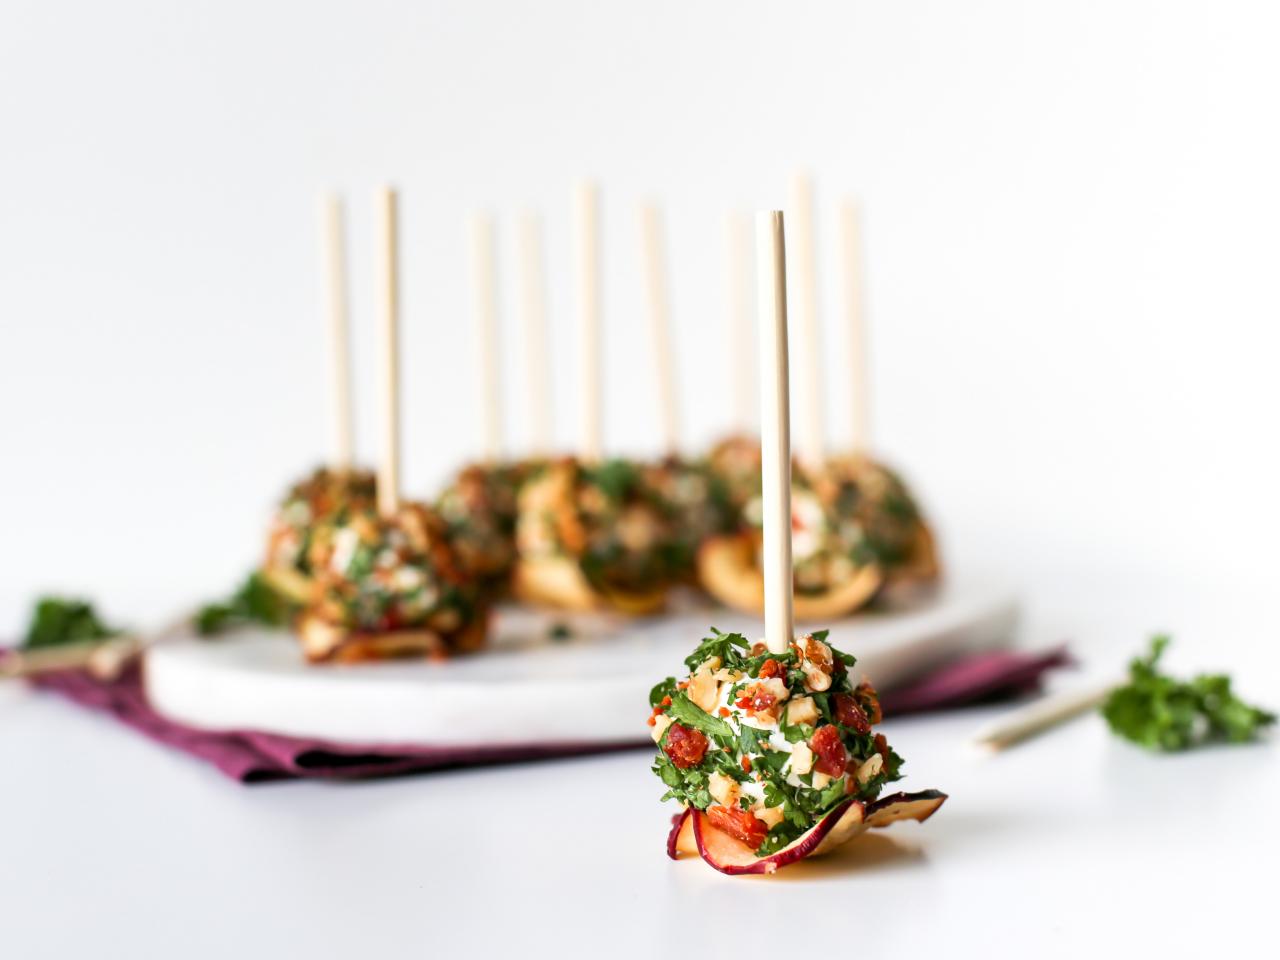 Ree Drummond's Goat Cheese Holiday Appetizer Takes Just 10 Minutes to Prep